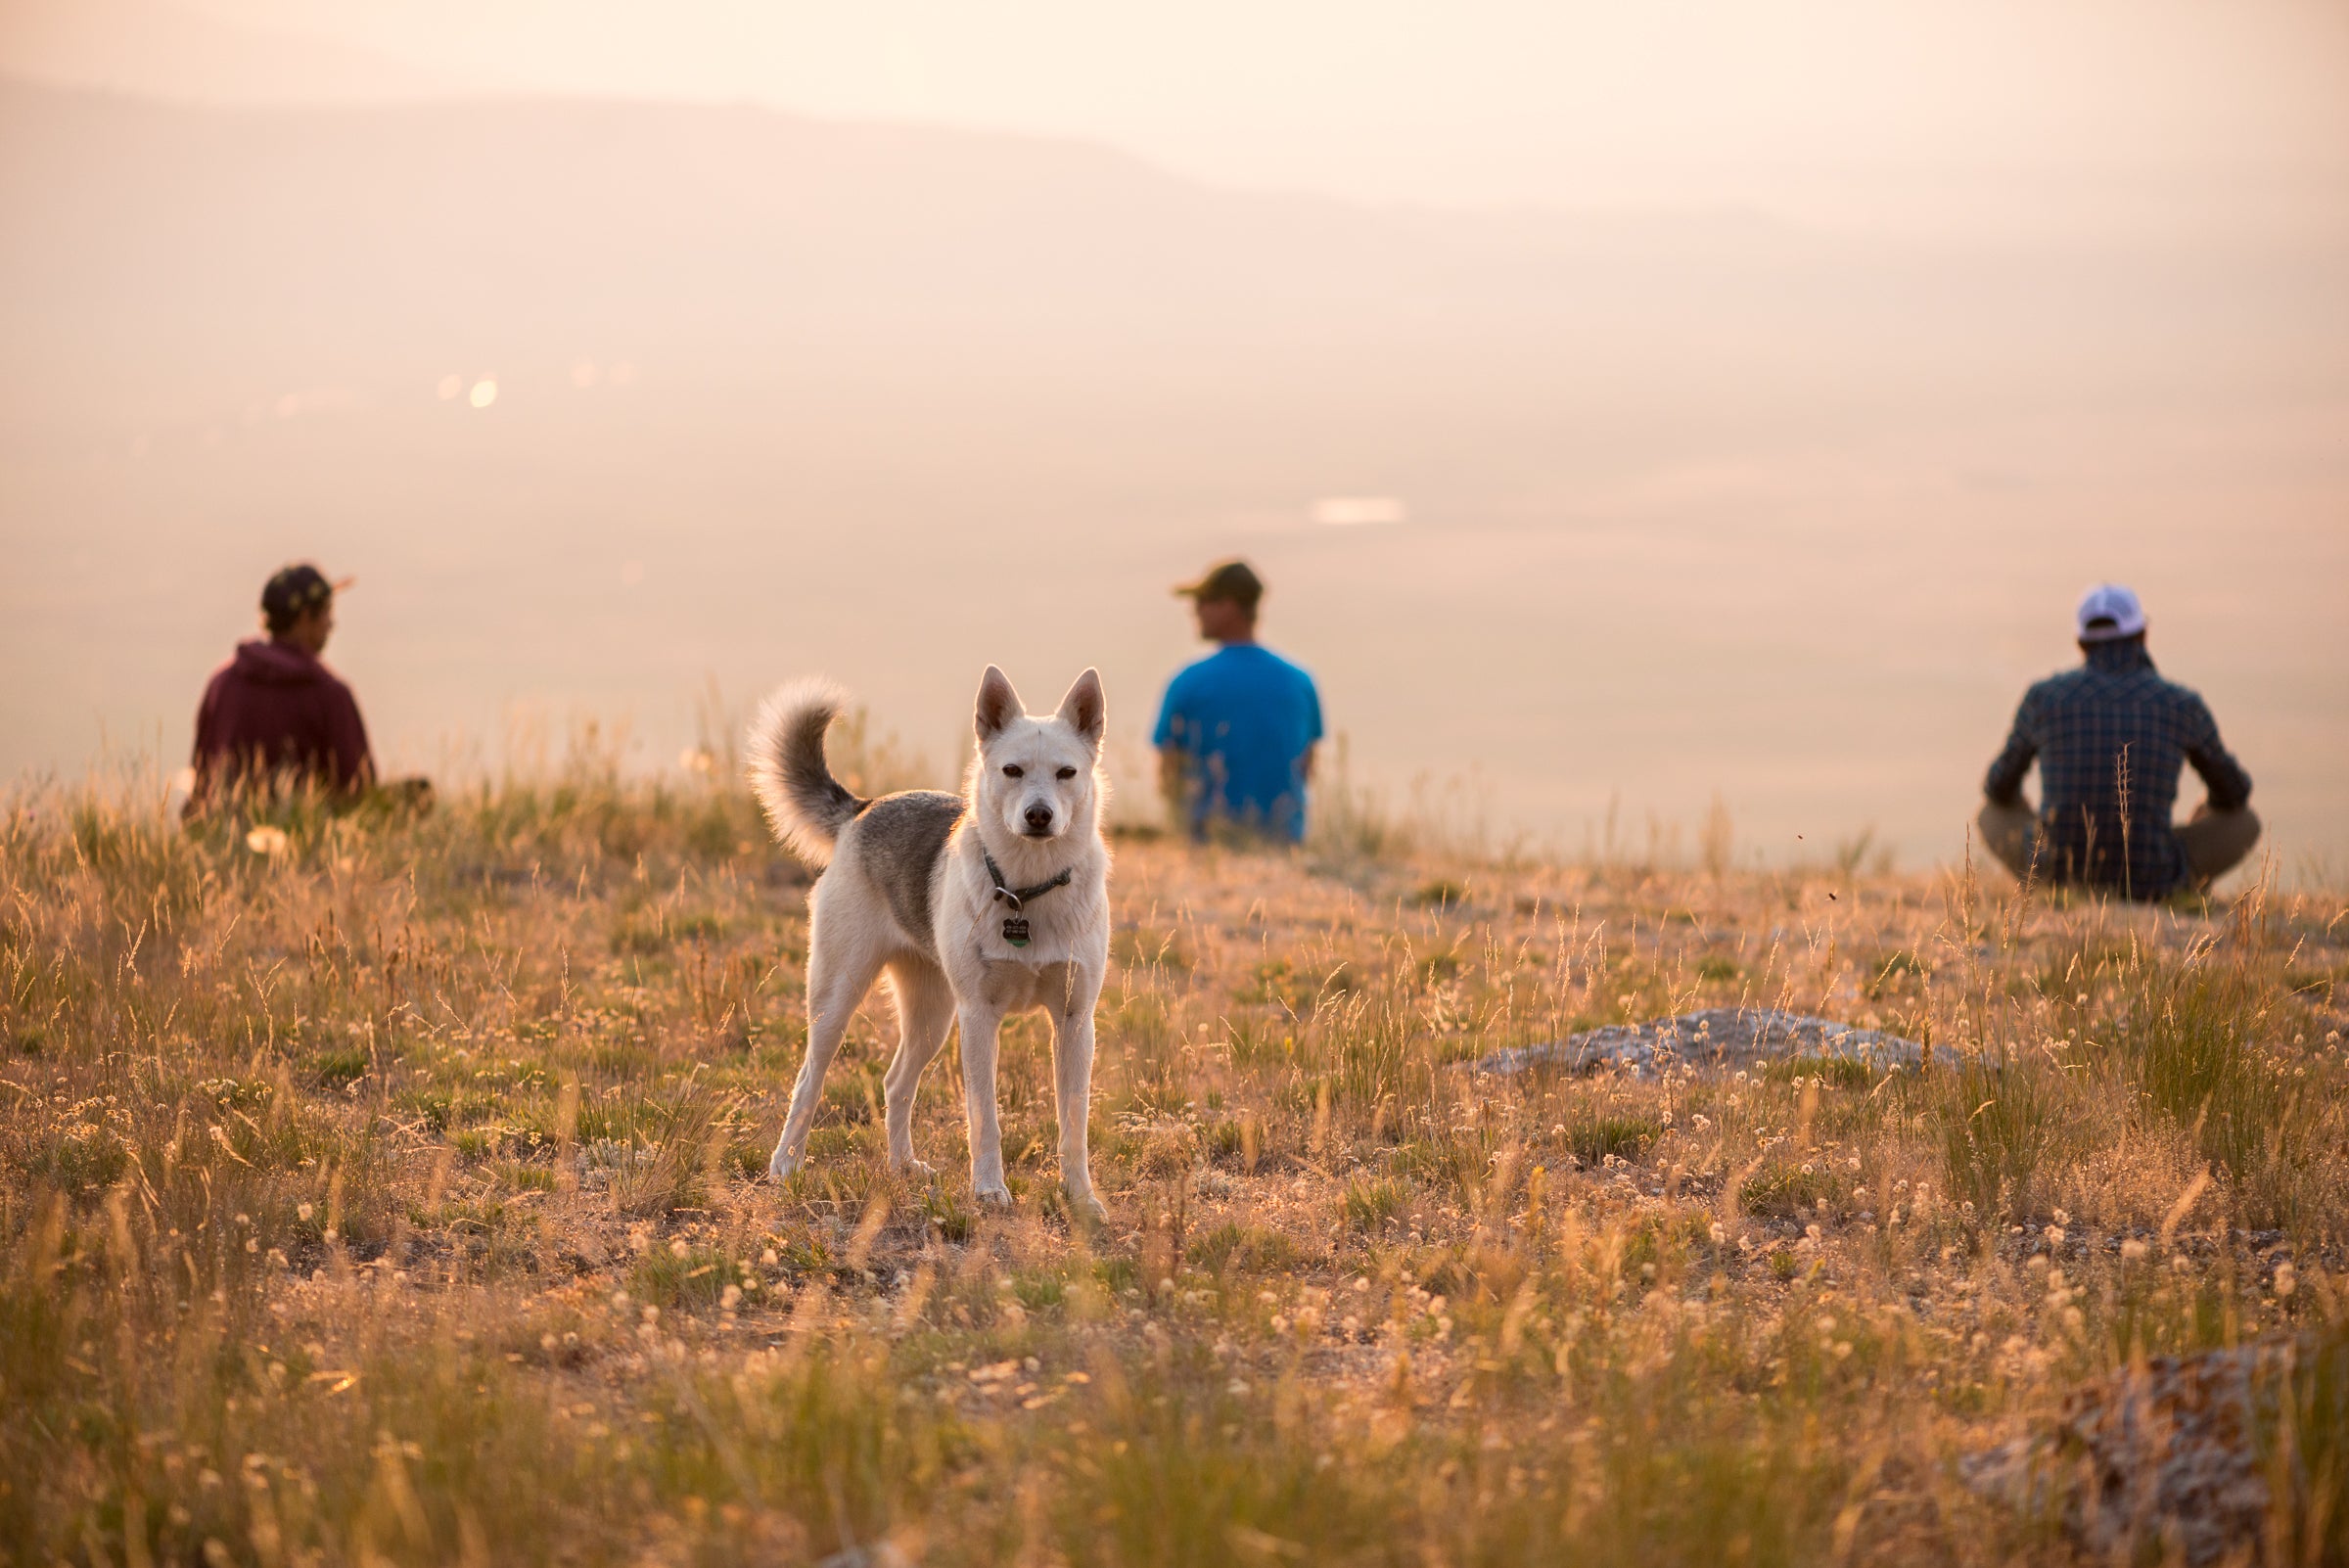 Dog in a field at sunset with three humans in the background